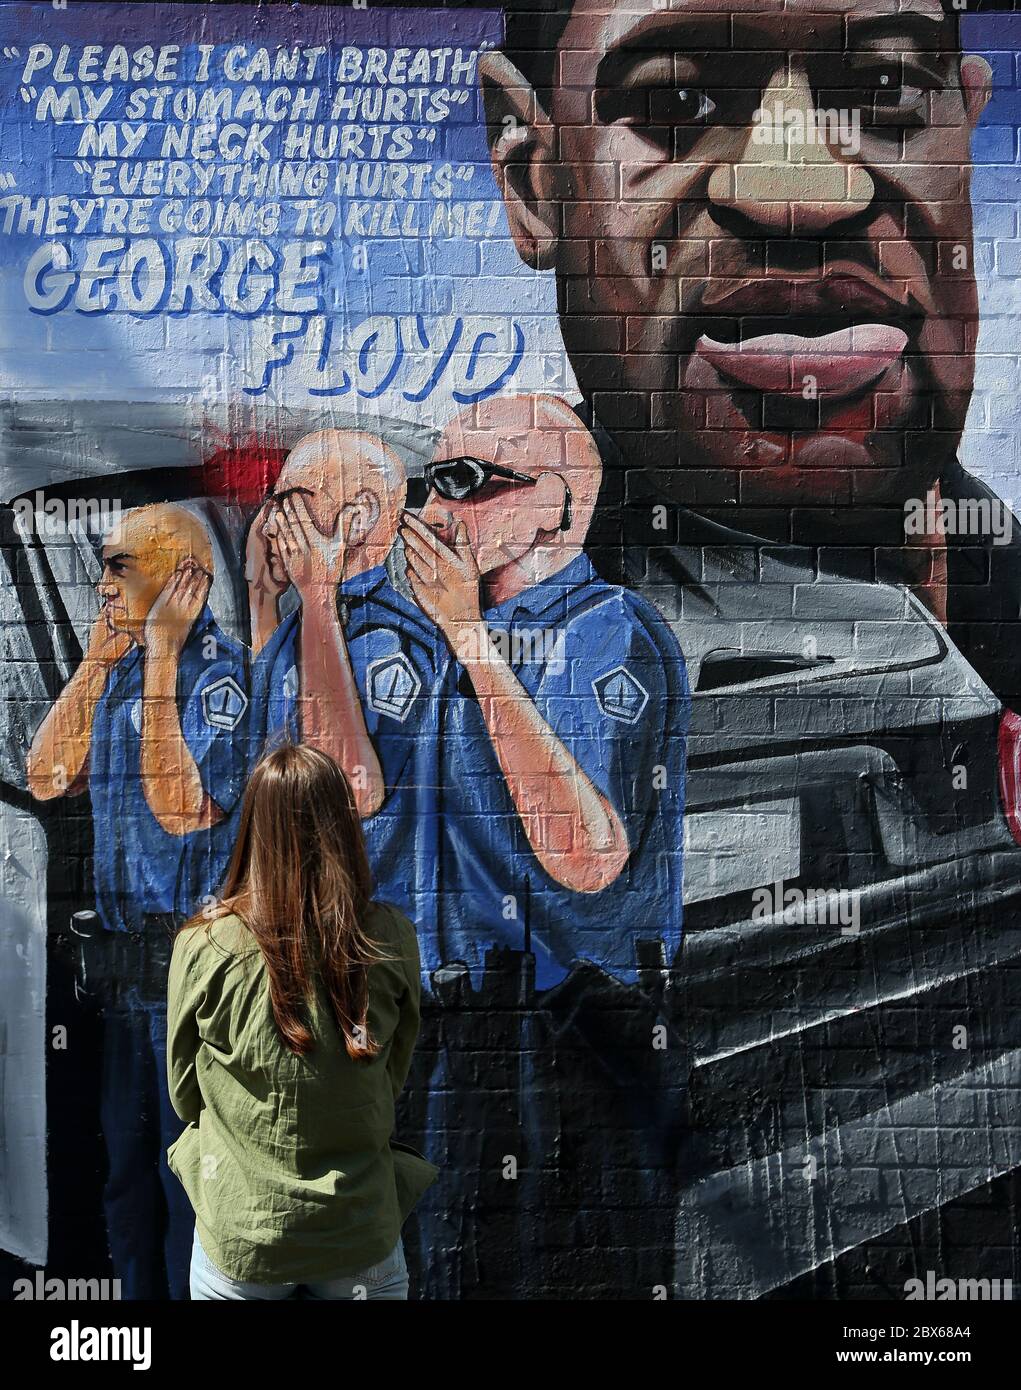 NOTE GRAPHIC CONTENT ON MURAL A woman stops to look at a mural to George Floyd at Belfast's International Wall on the Falls Road. Mr Floyd was killed on May 25 while in police custody in the US city of Minneapolis. The mural was commissioned by Feile an Phobail and Failte Feirste Thiar, and painted by Marty Lyons and Micky Doherty. Stock Photo